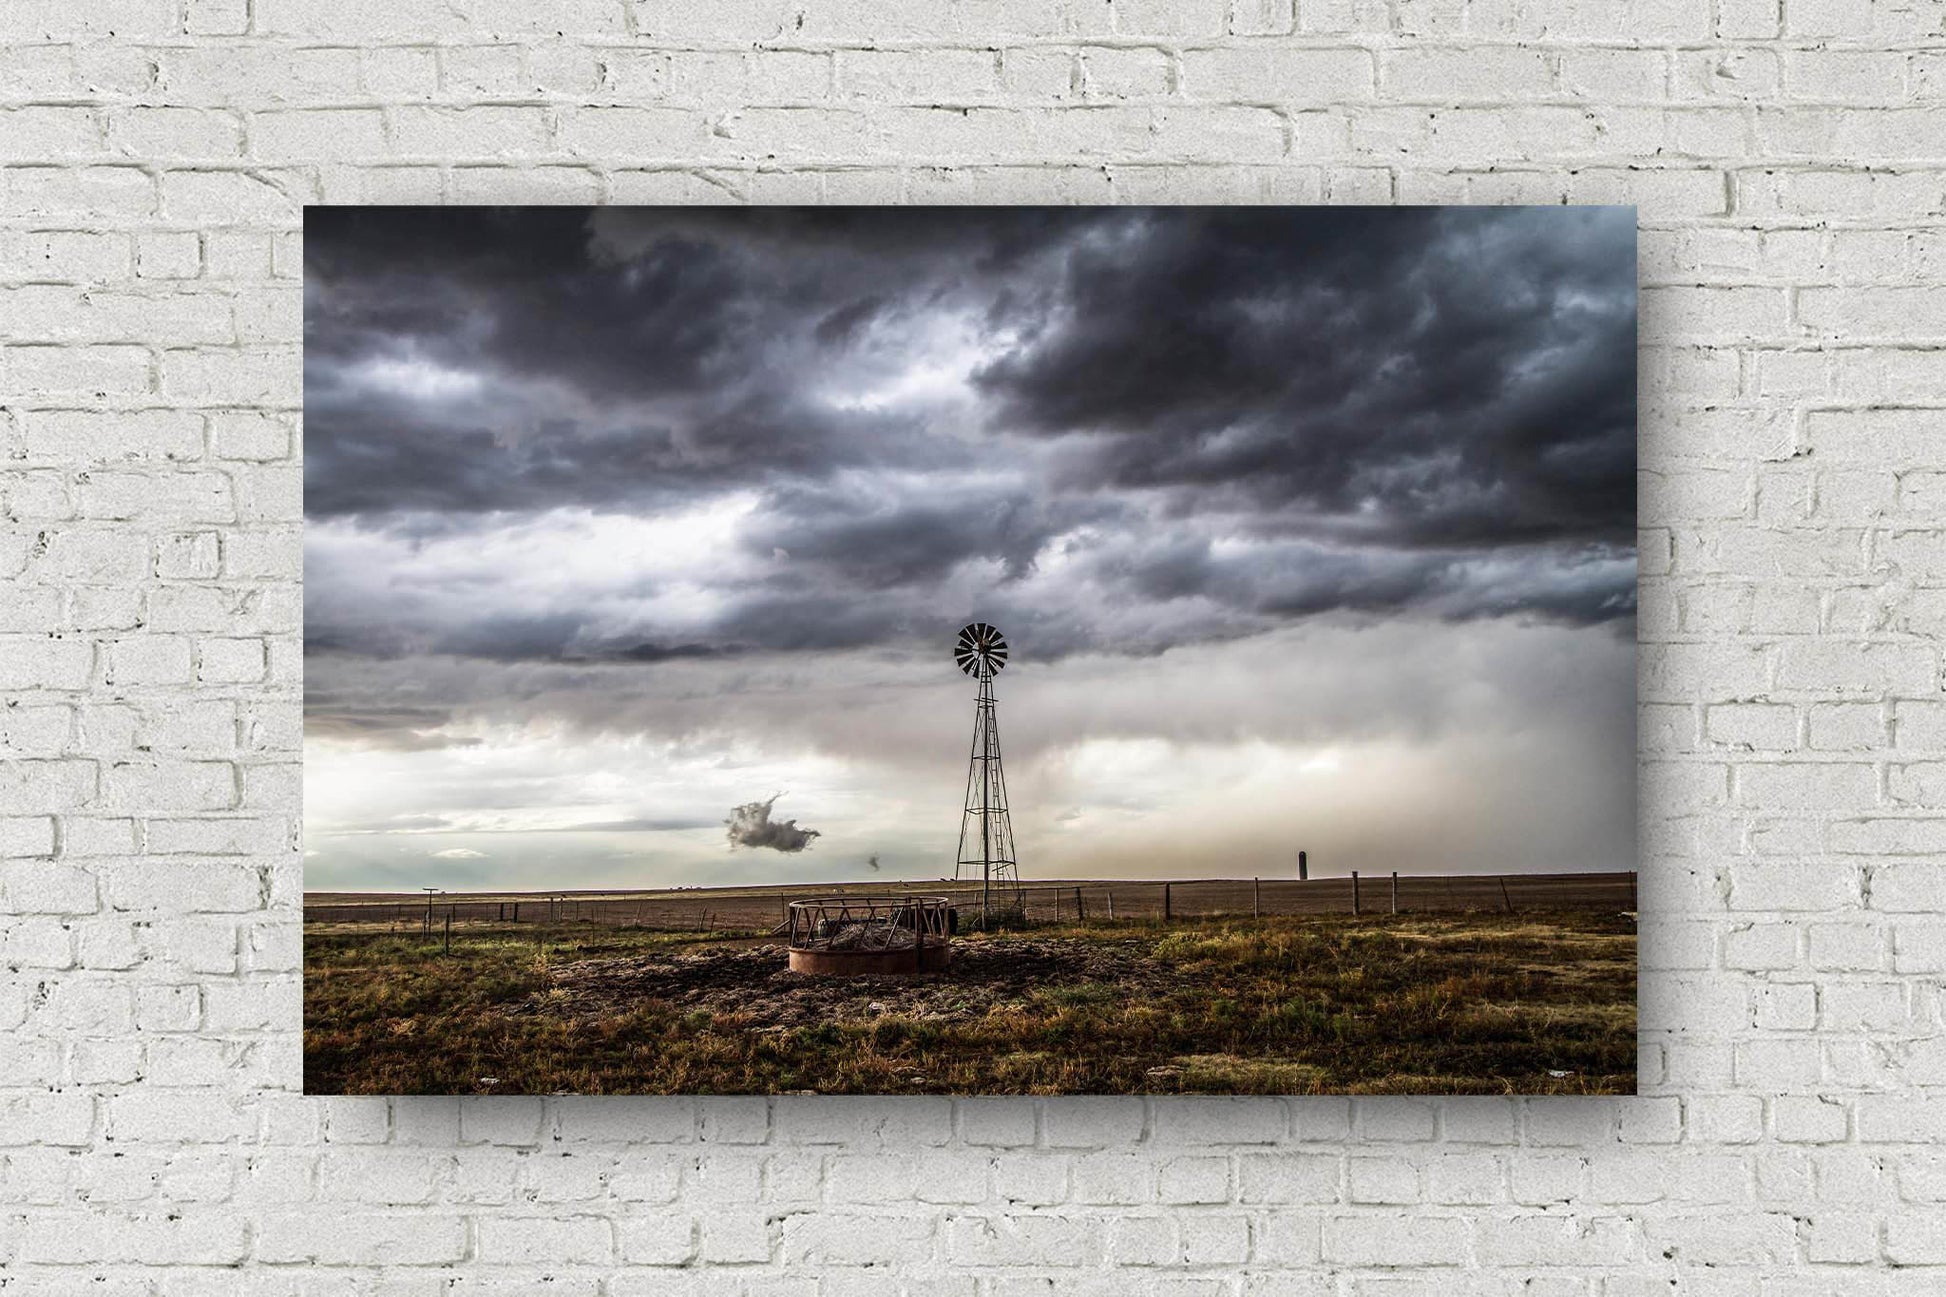 Country aluminum metal print wall art of an old windmill underneath a stormy sky on a spring day in the Oklahoma panhandle by Sean Ramsey of Southern Plains Photography.